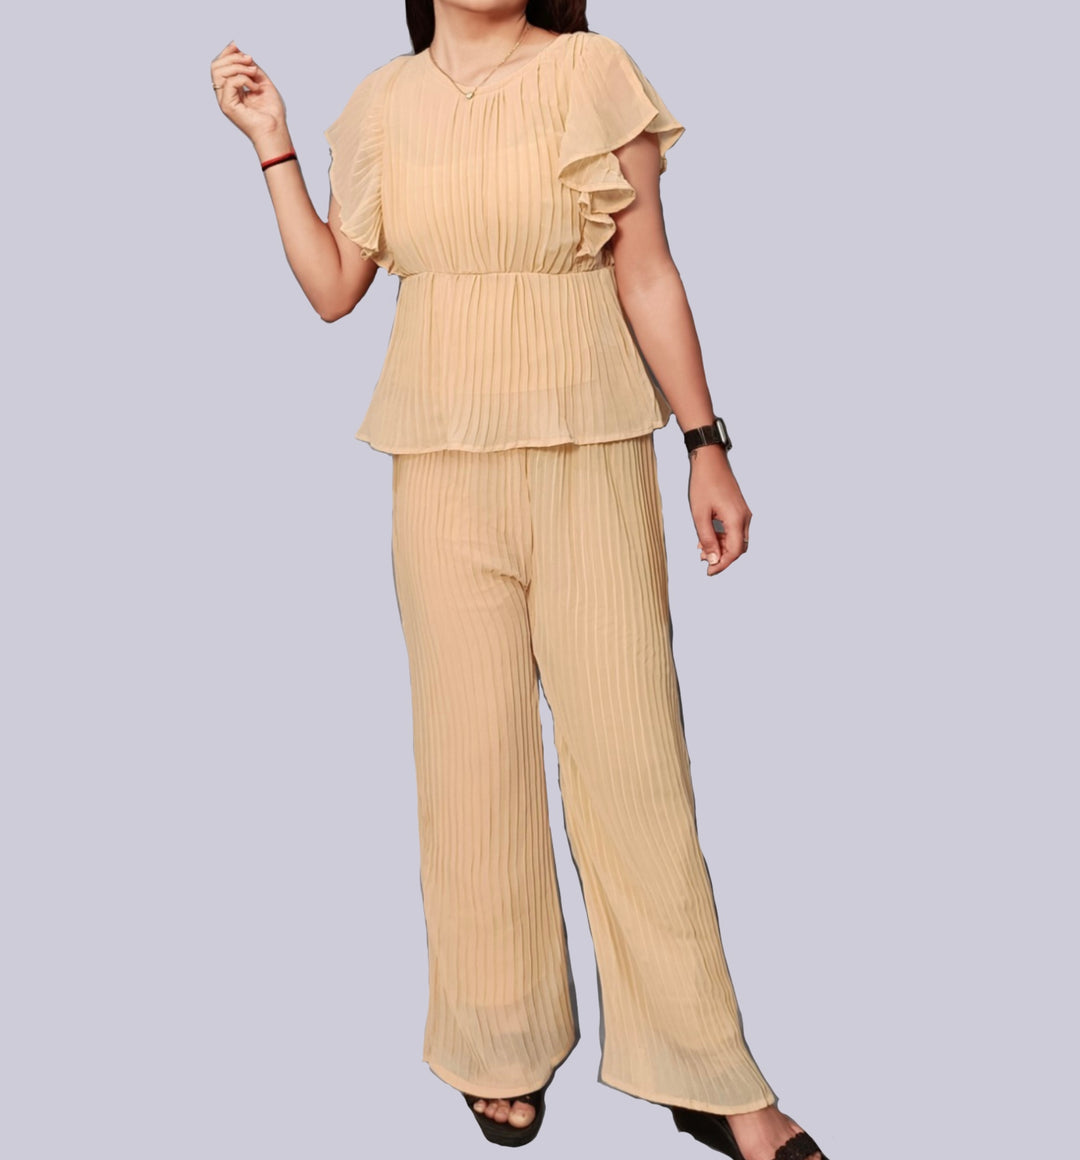 Co Ord Sets Women  Ladies Co Ords for Sale - Rebellious Fashion